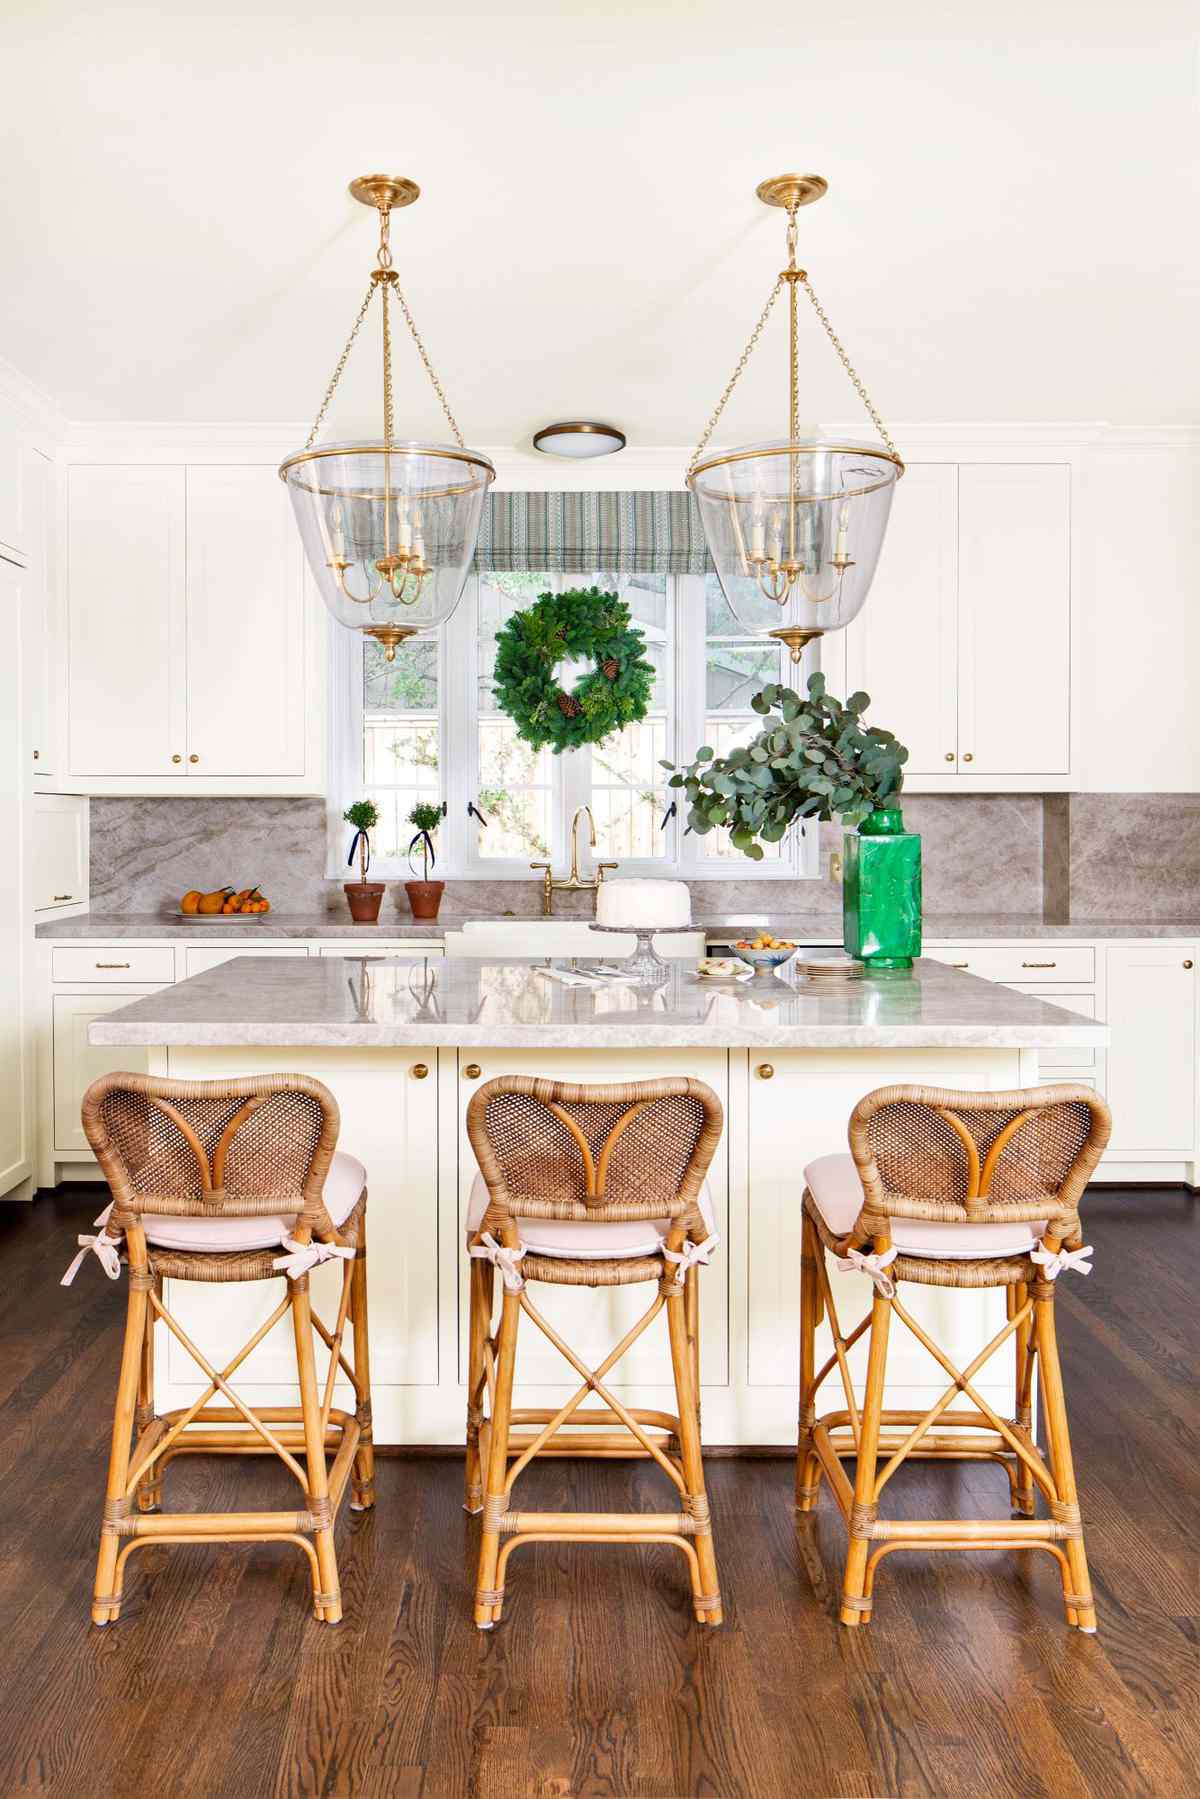 Ranch House Kitchen with White Cabinetry and Island Seating